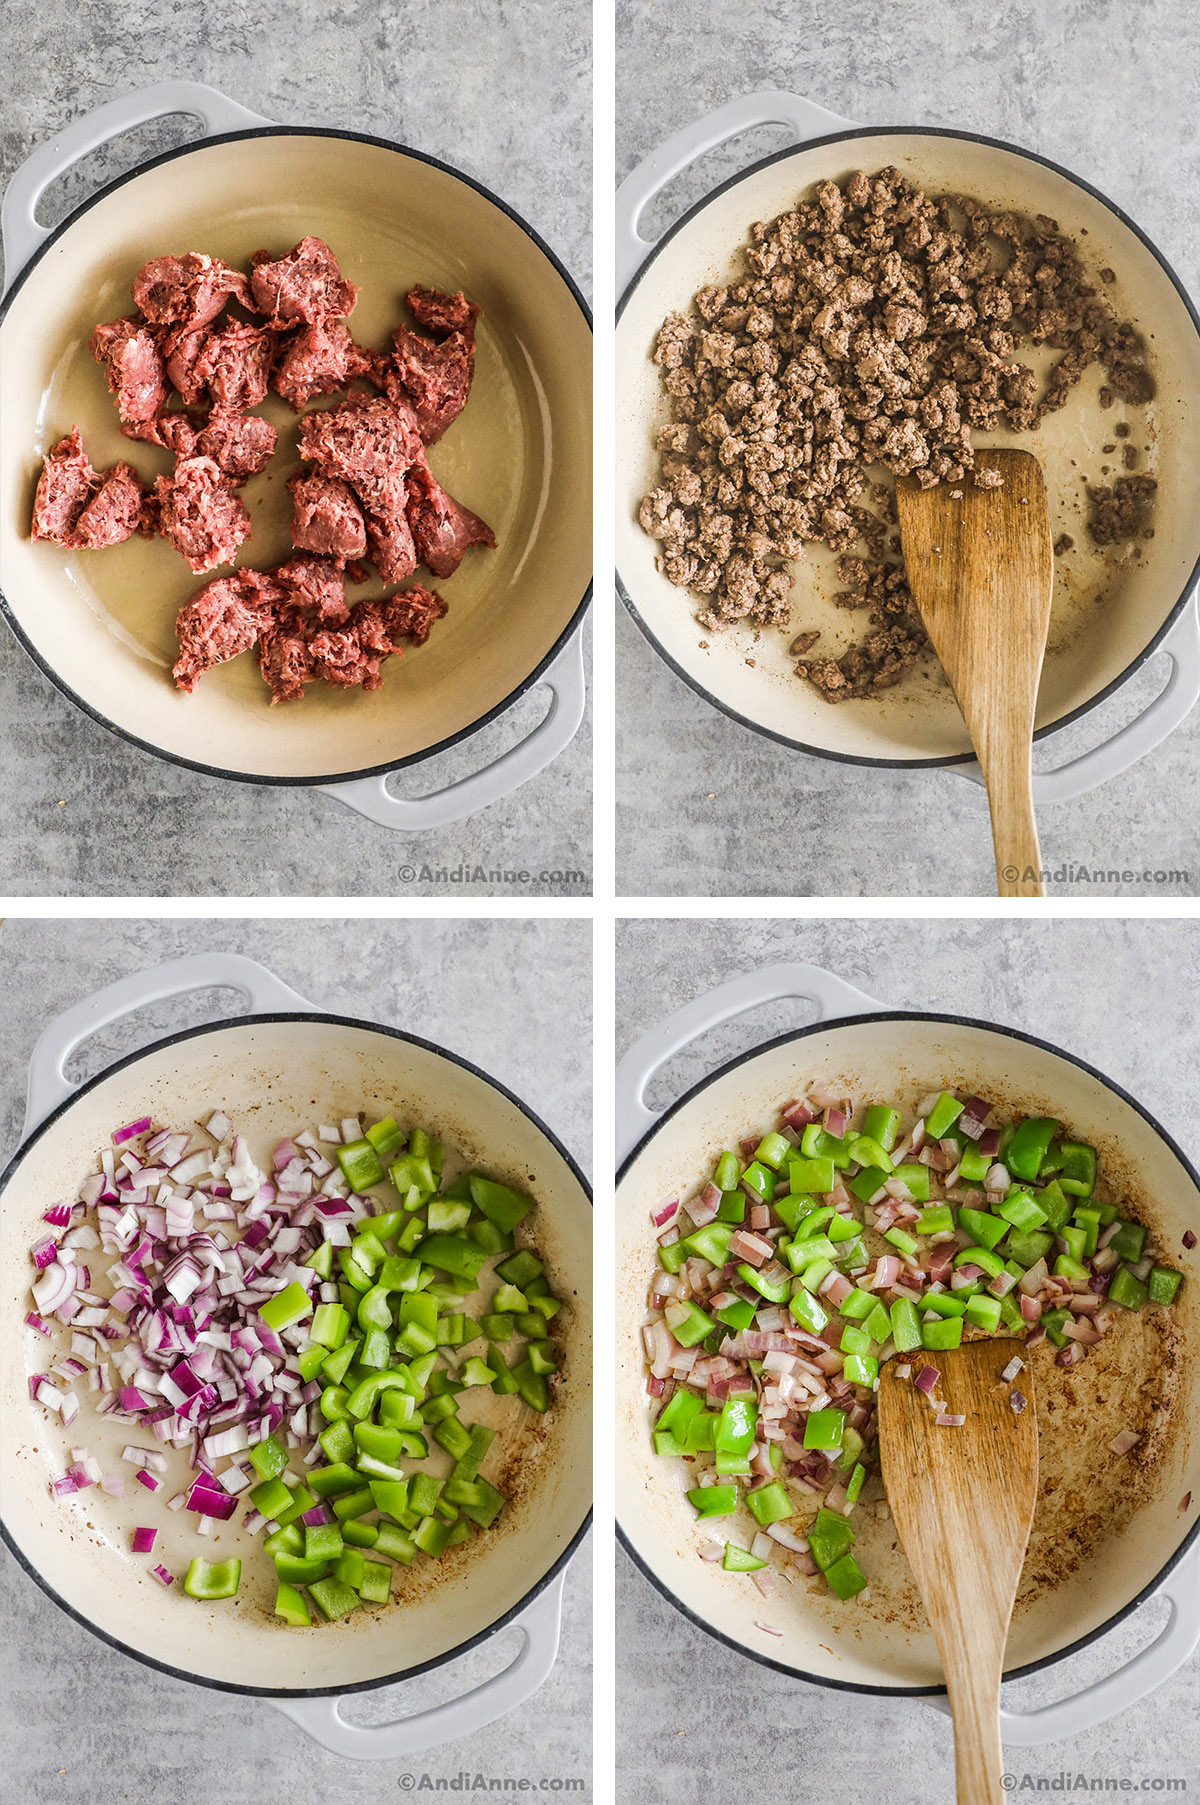 Four images combined. First two ground beef in pot, first raw, second cooked and crumbled. Third and fourth a pot with chopped onion and green bell pepper.